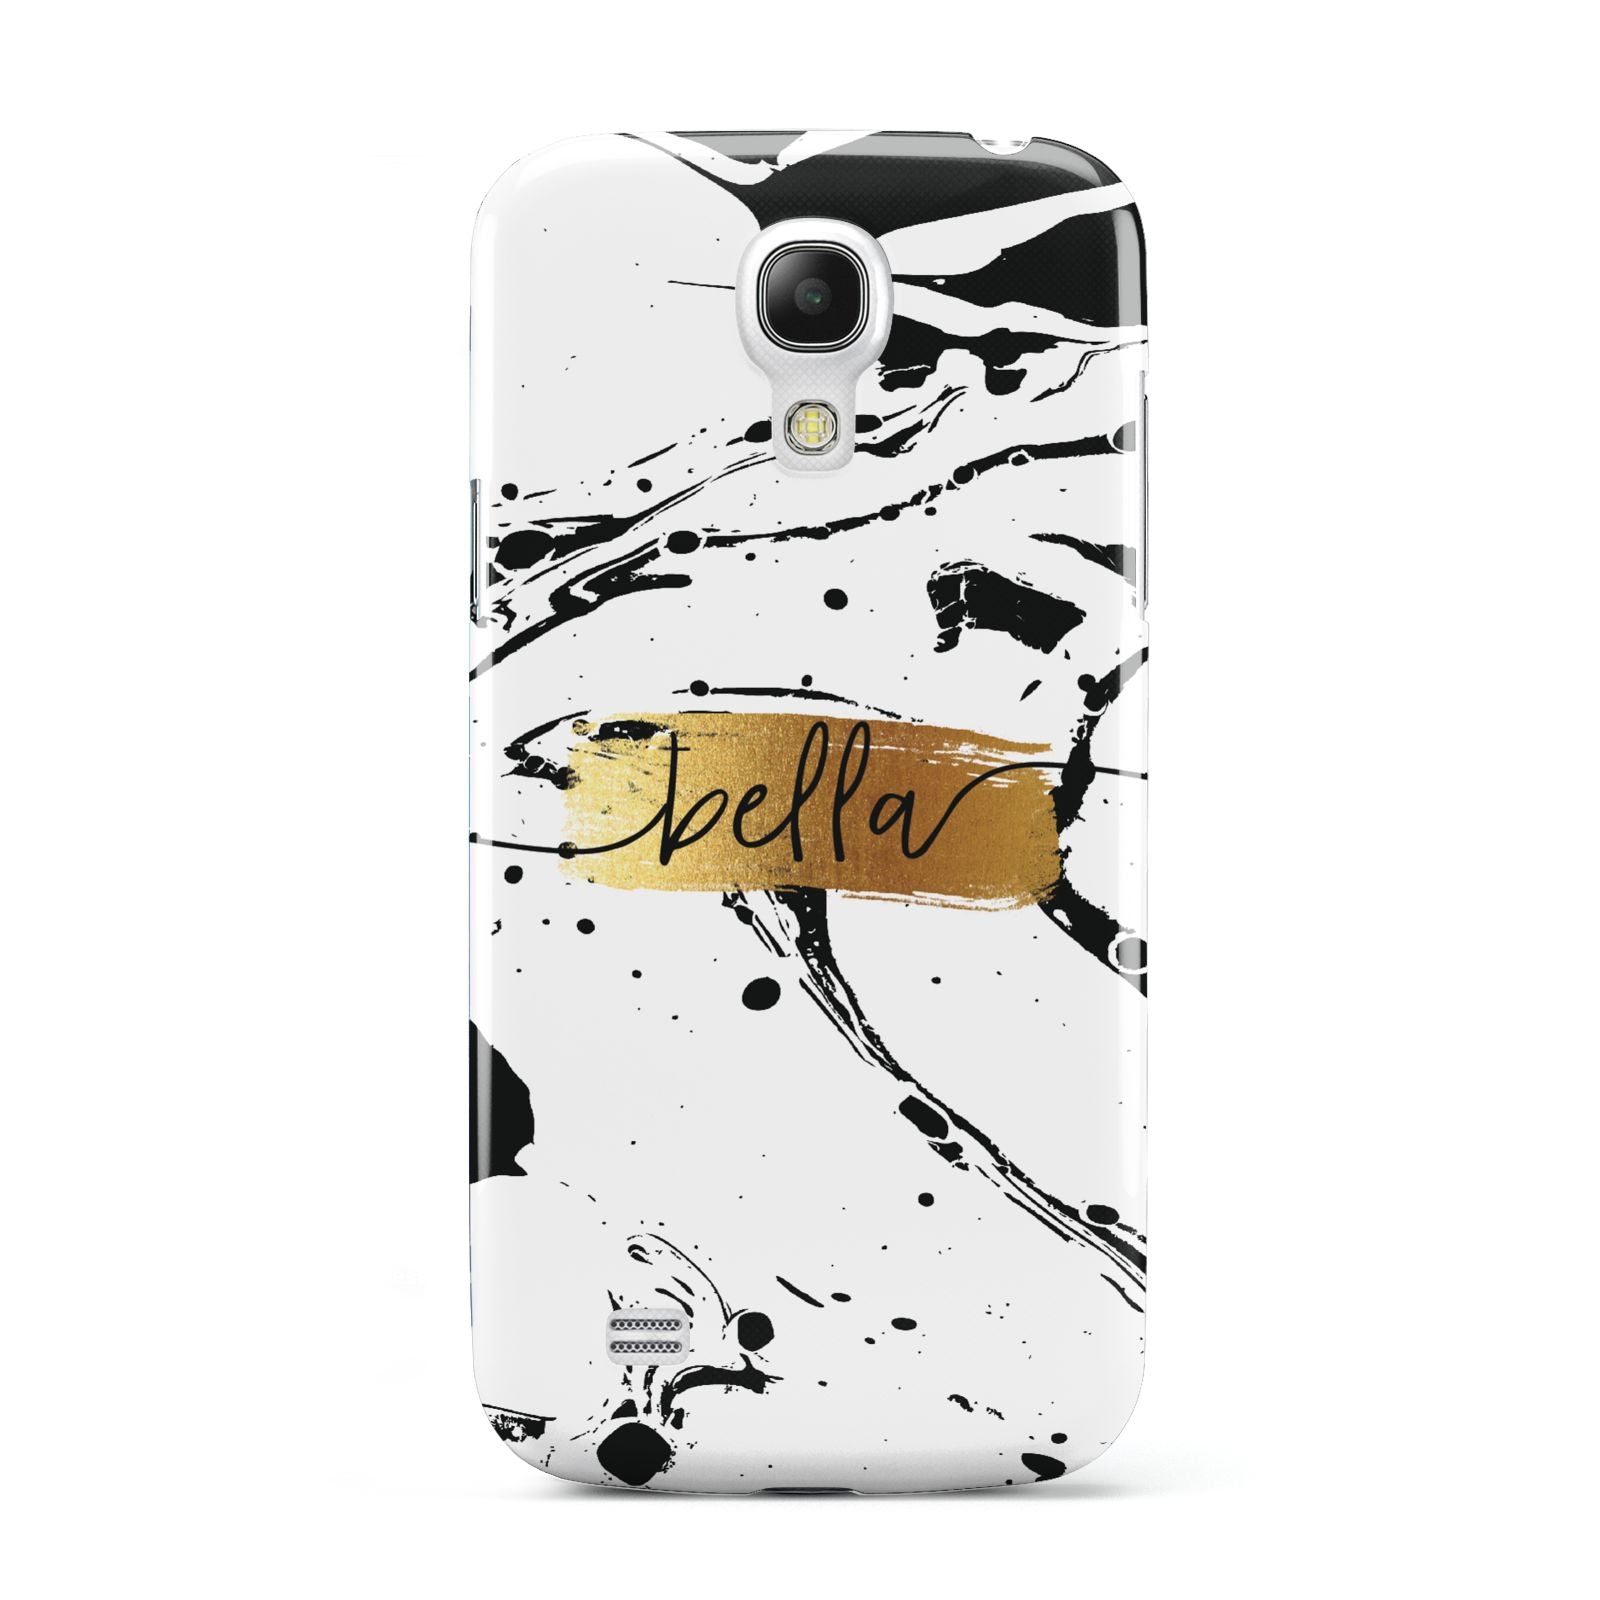 Personalised White Gold Swirl Marble Samsung Galaxy S4 Mini Case